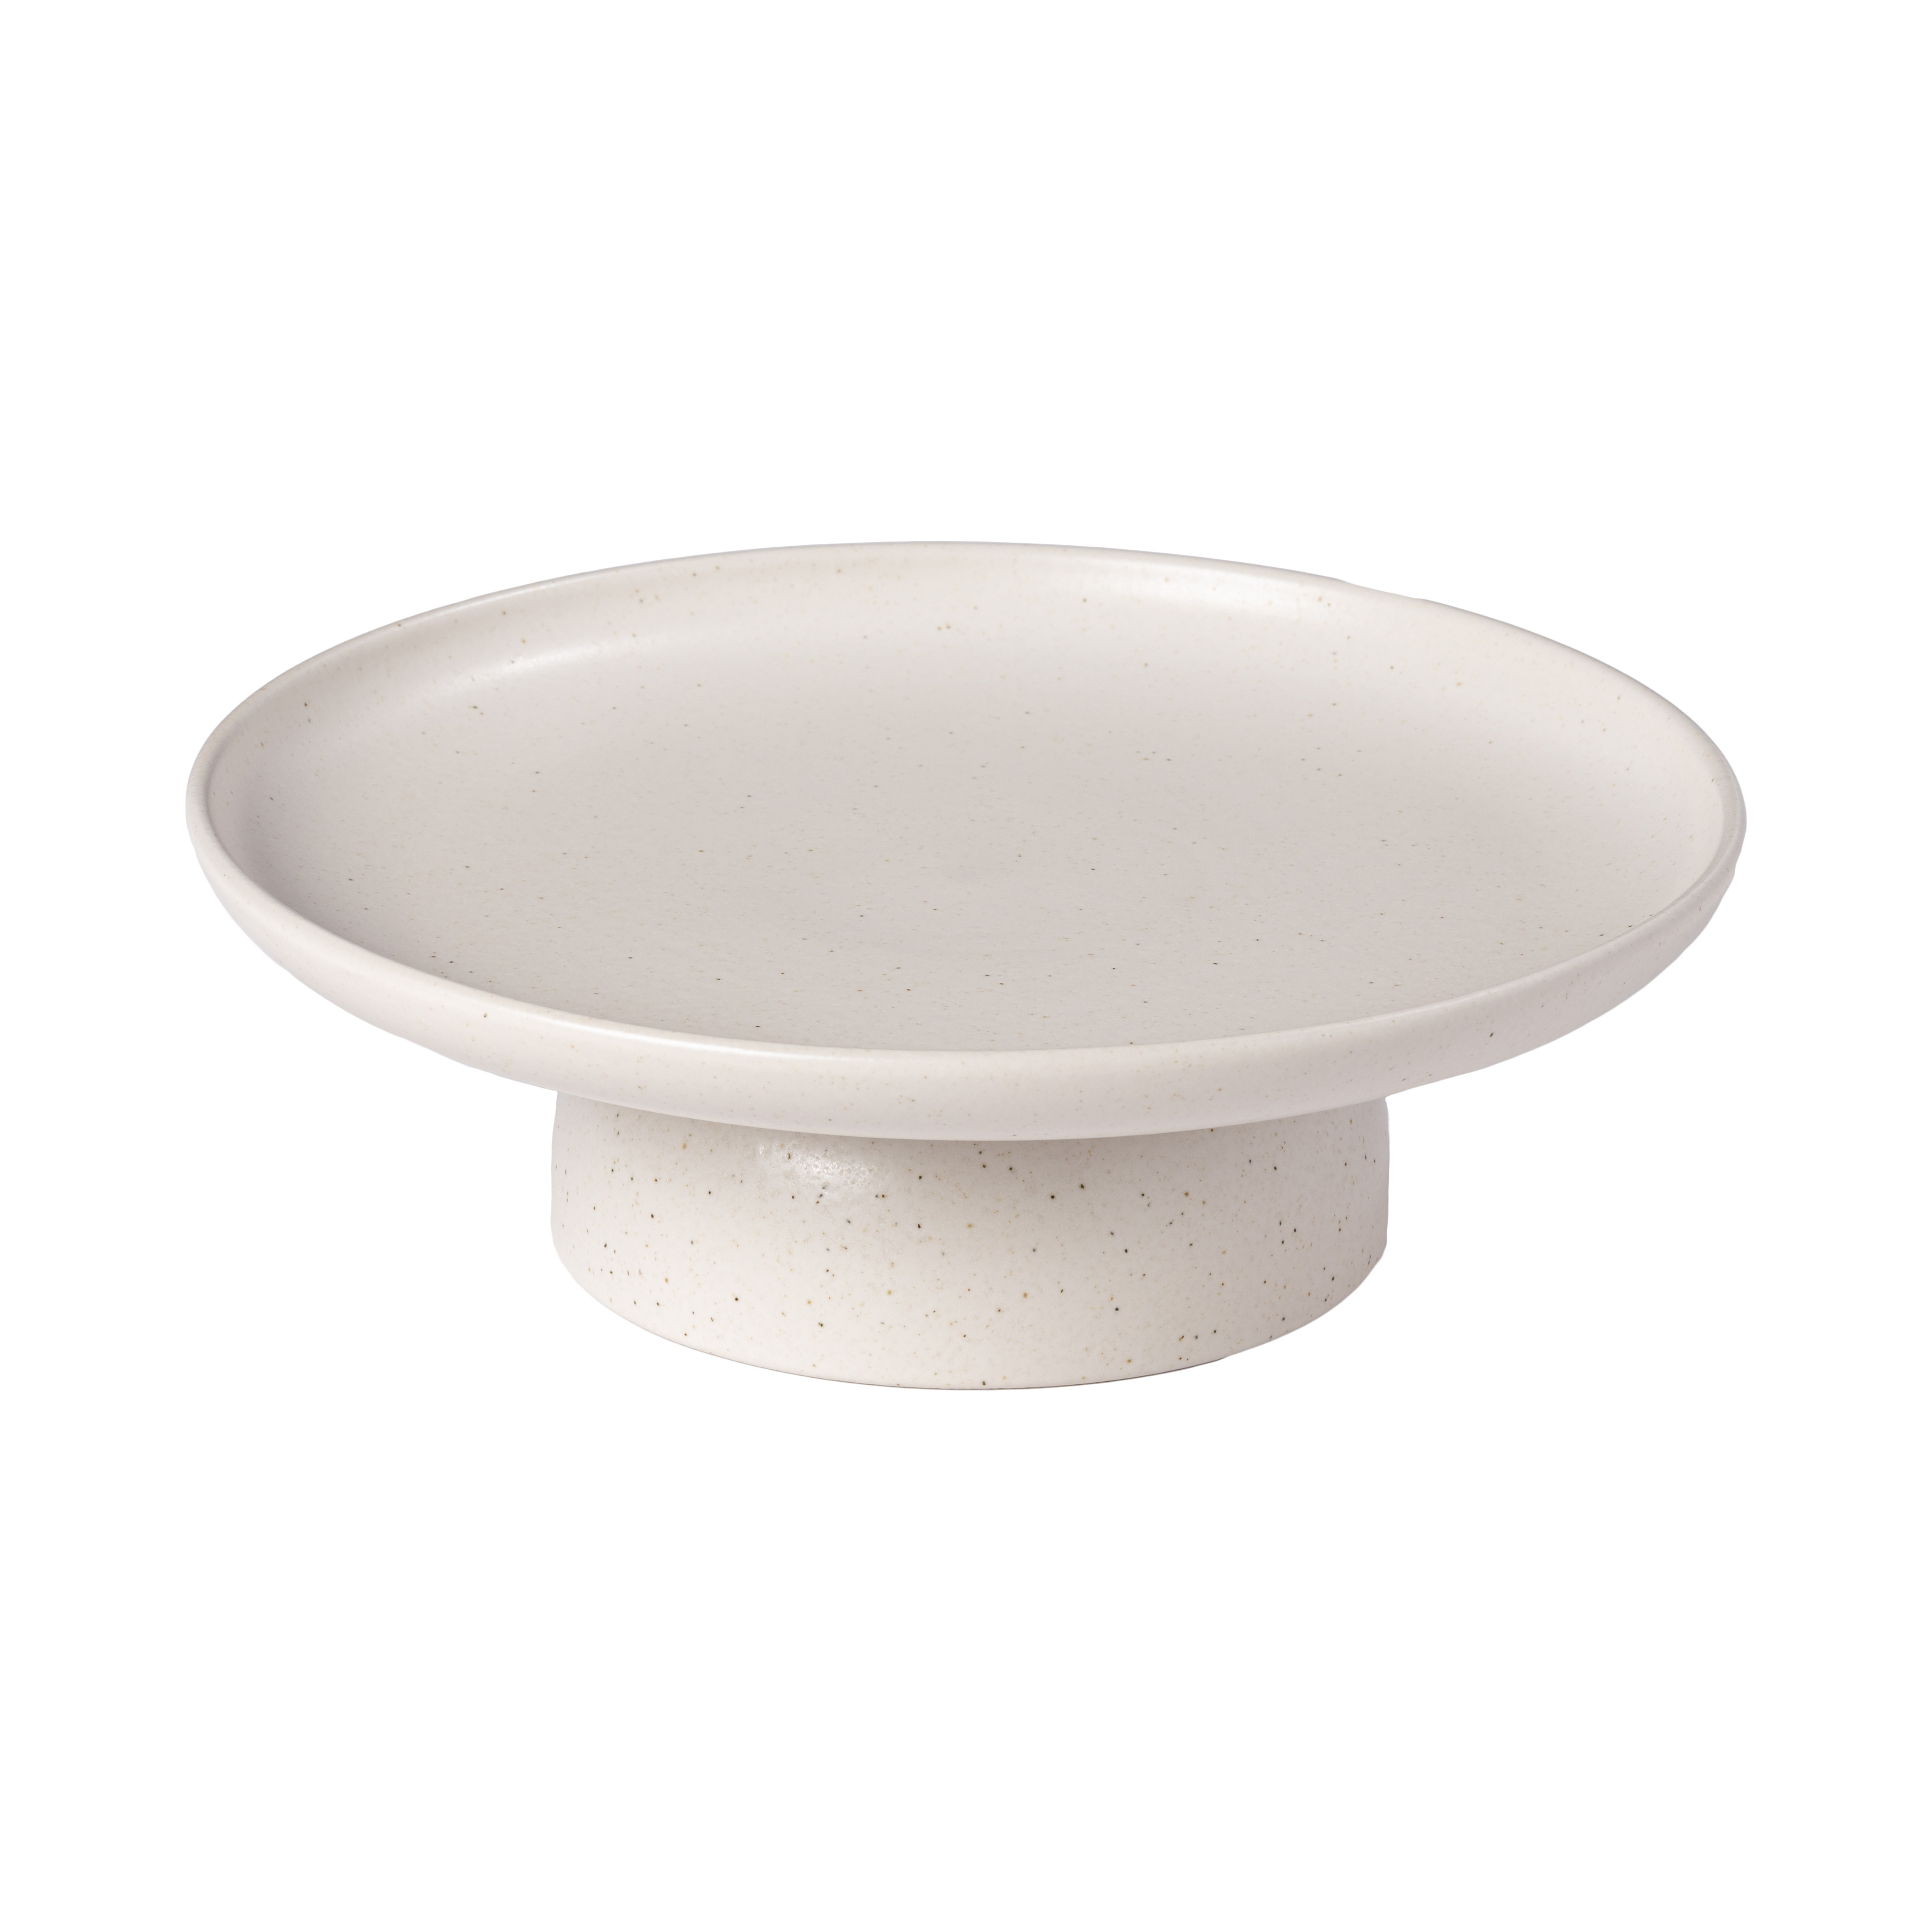 Pacifica Vanilla Footed Plate 26.8cm Gift